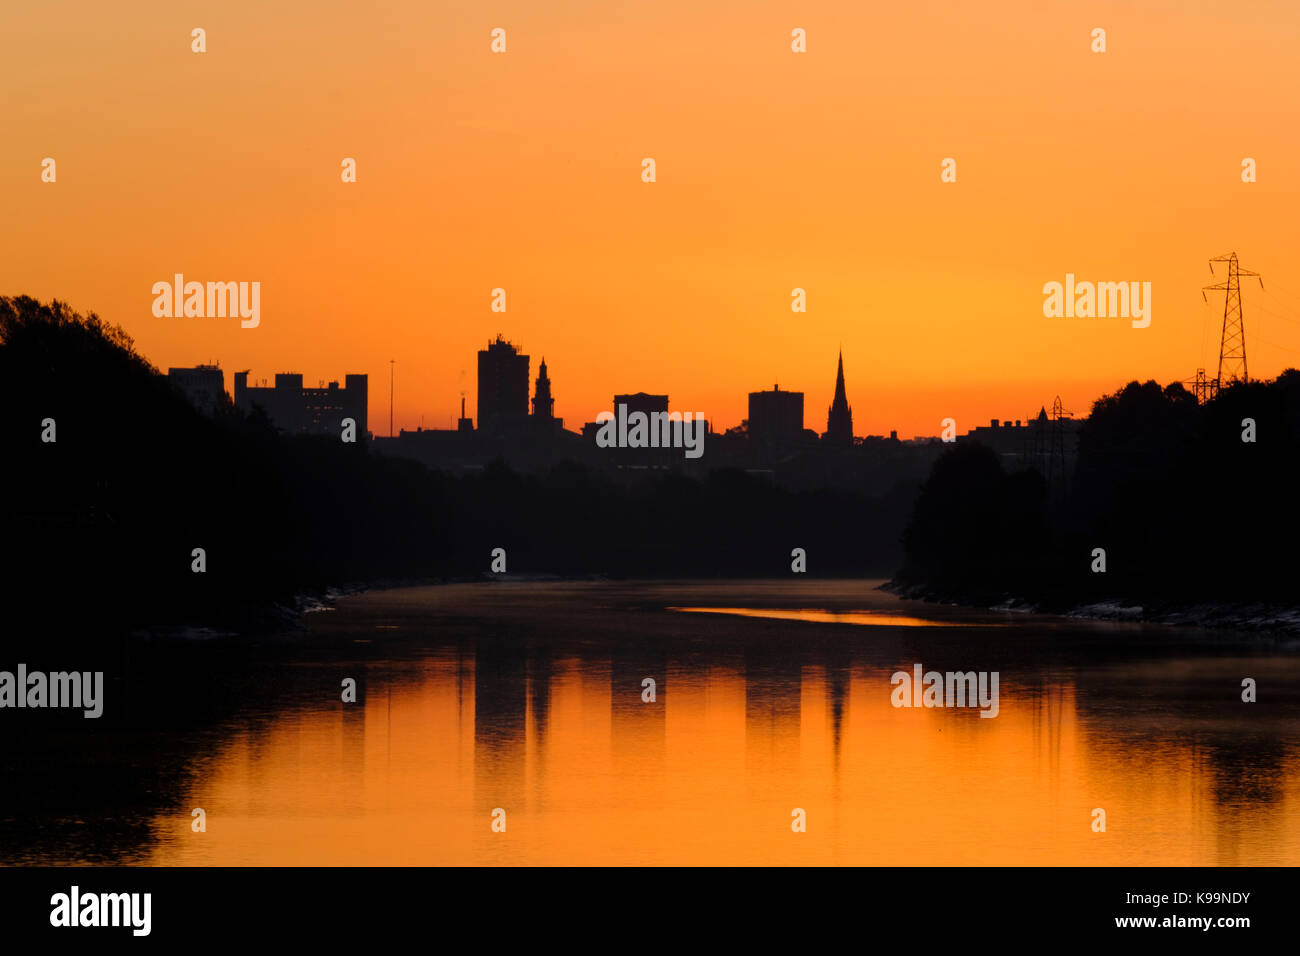 Preston, UK. 22nd Sep, 2017. The sky glowed orange at dawn broke over the River Ribble in Preston today. The city centre silhouetted against the rising sun. Credit: Paul Melling/Alamy Live News Stock Photo